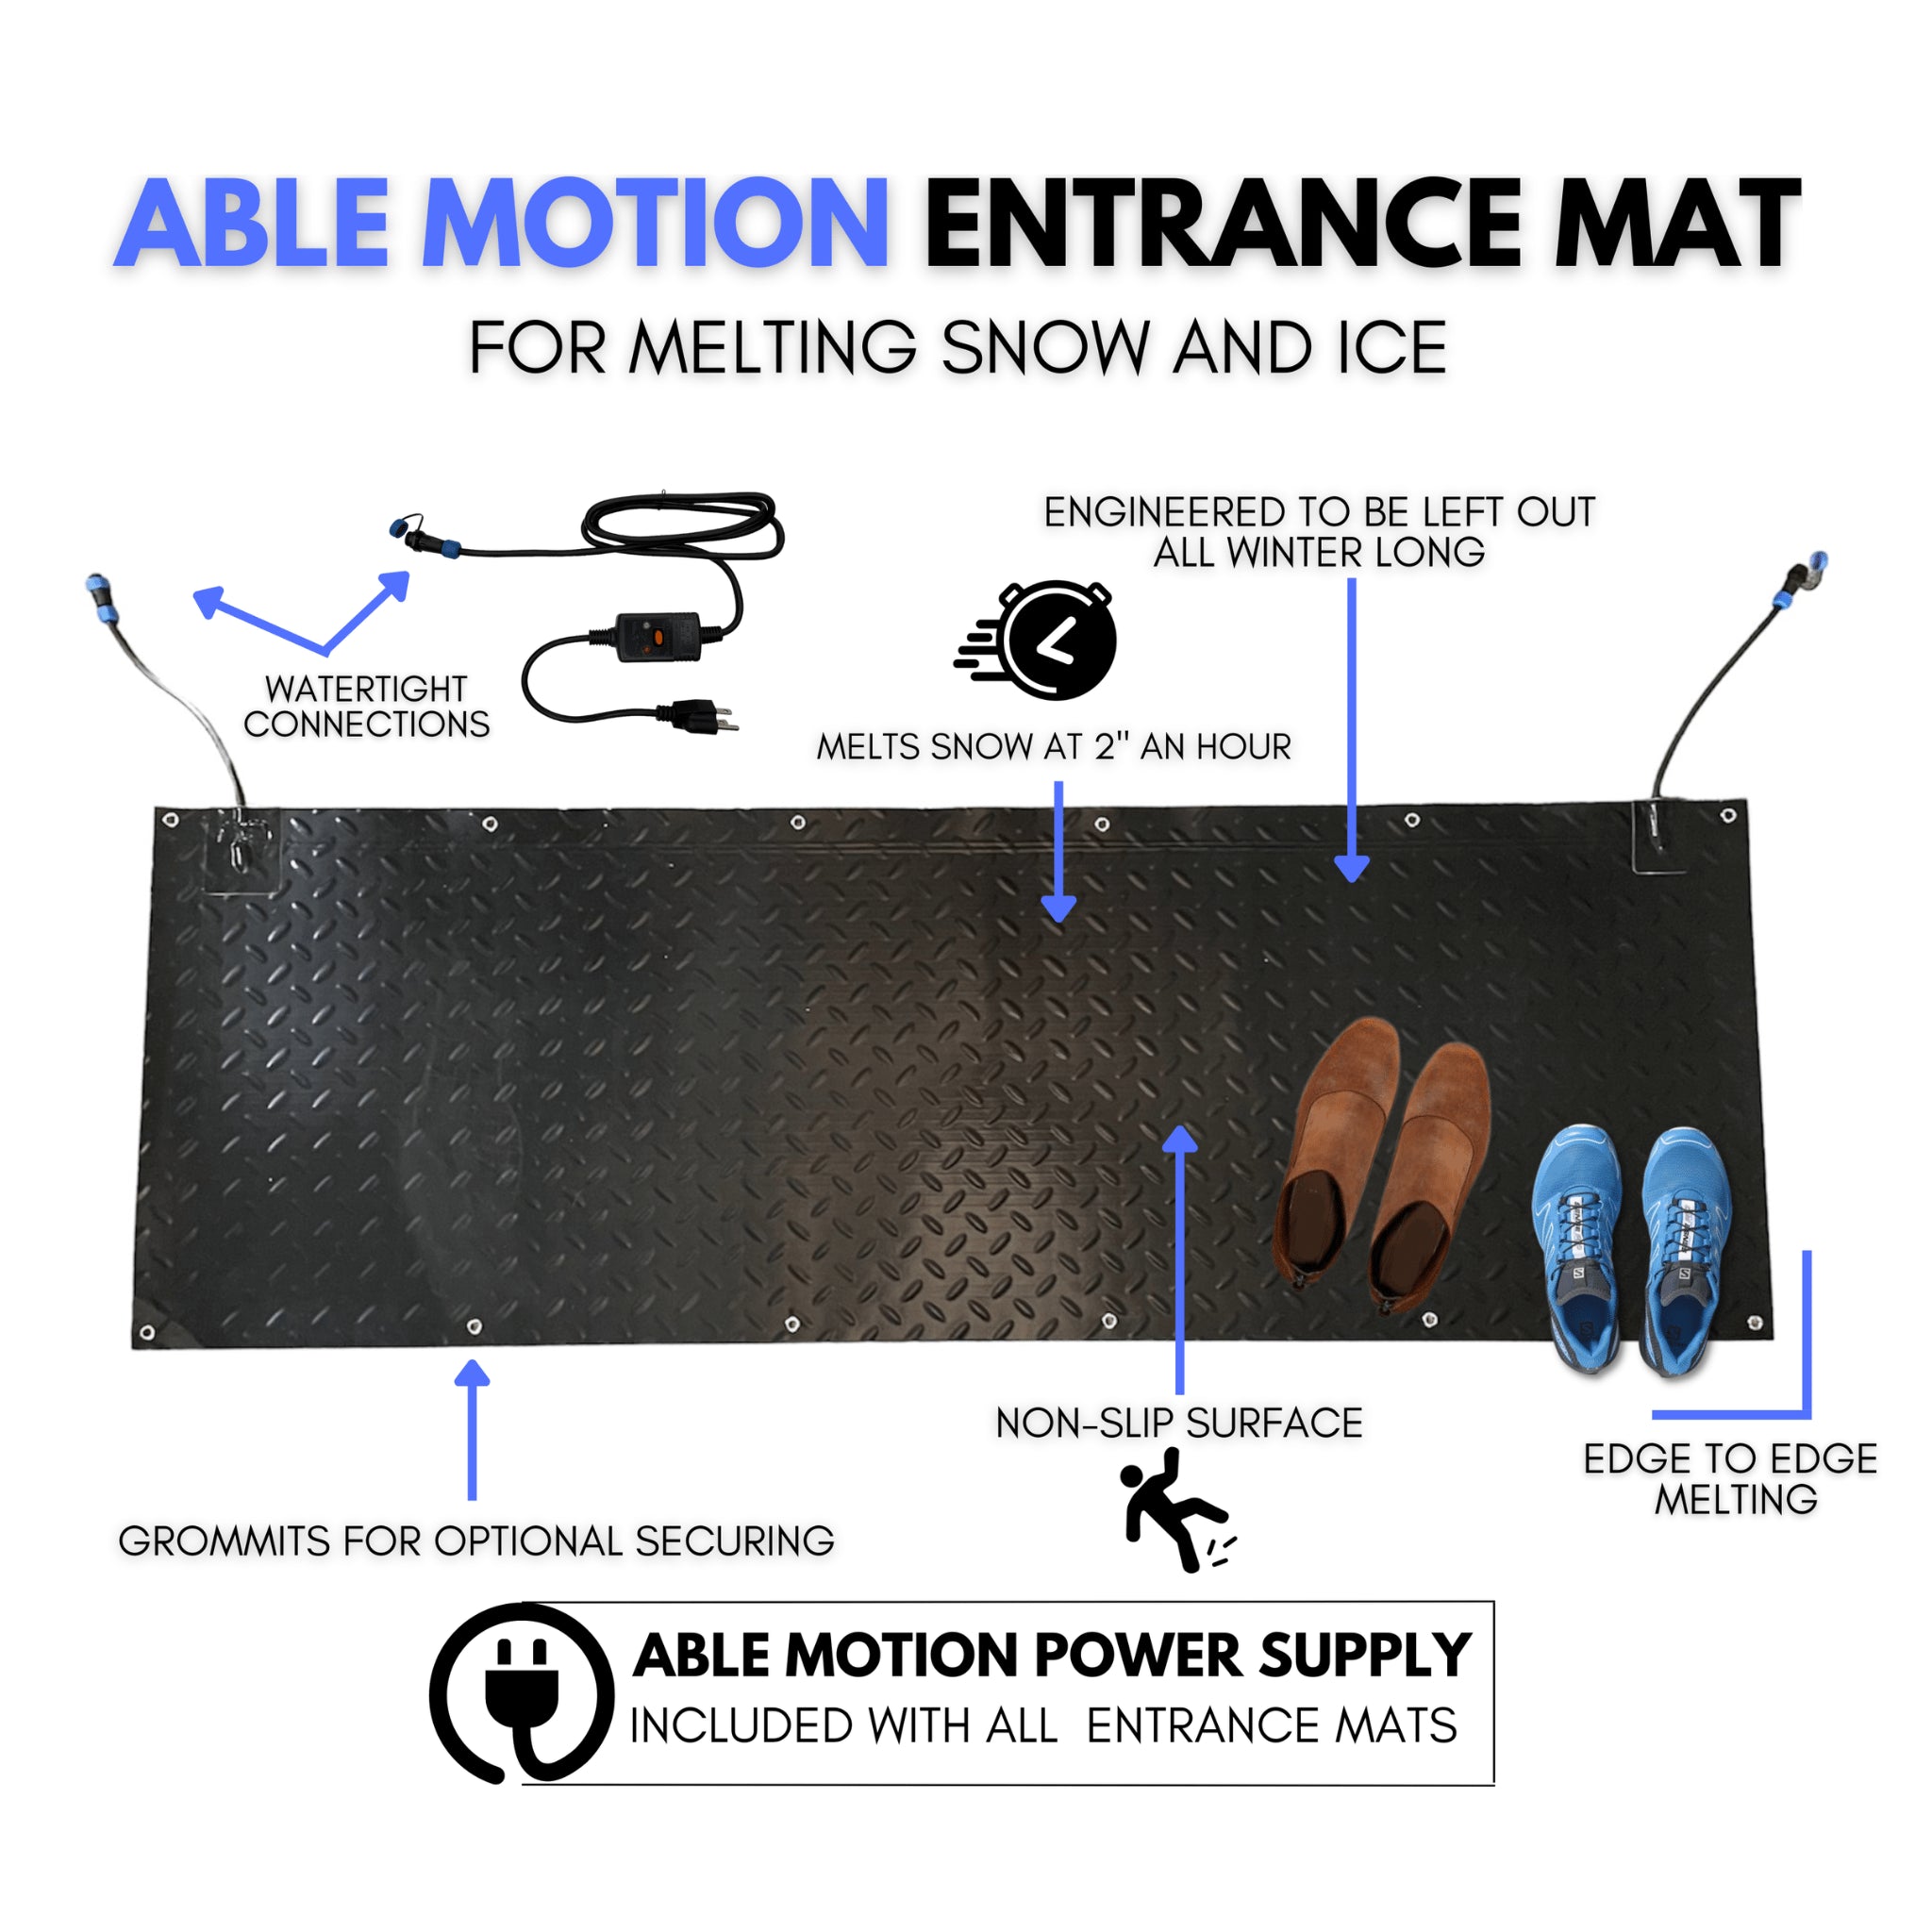 Able Motion Mobility: High-Quality Heated Door Mats for Safe